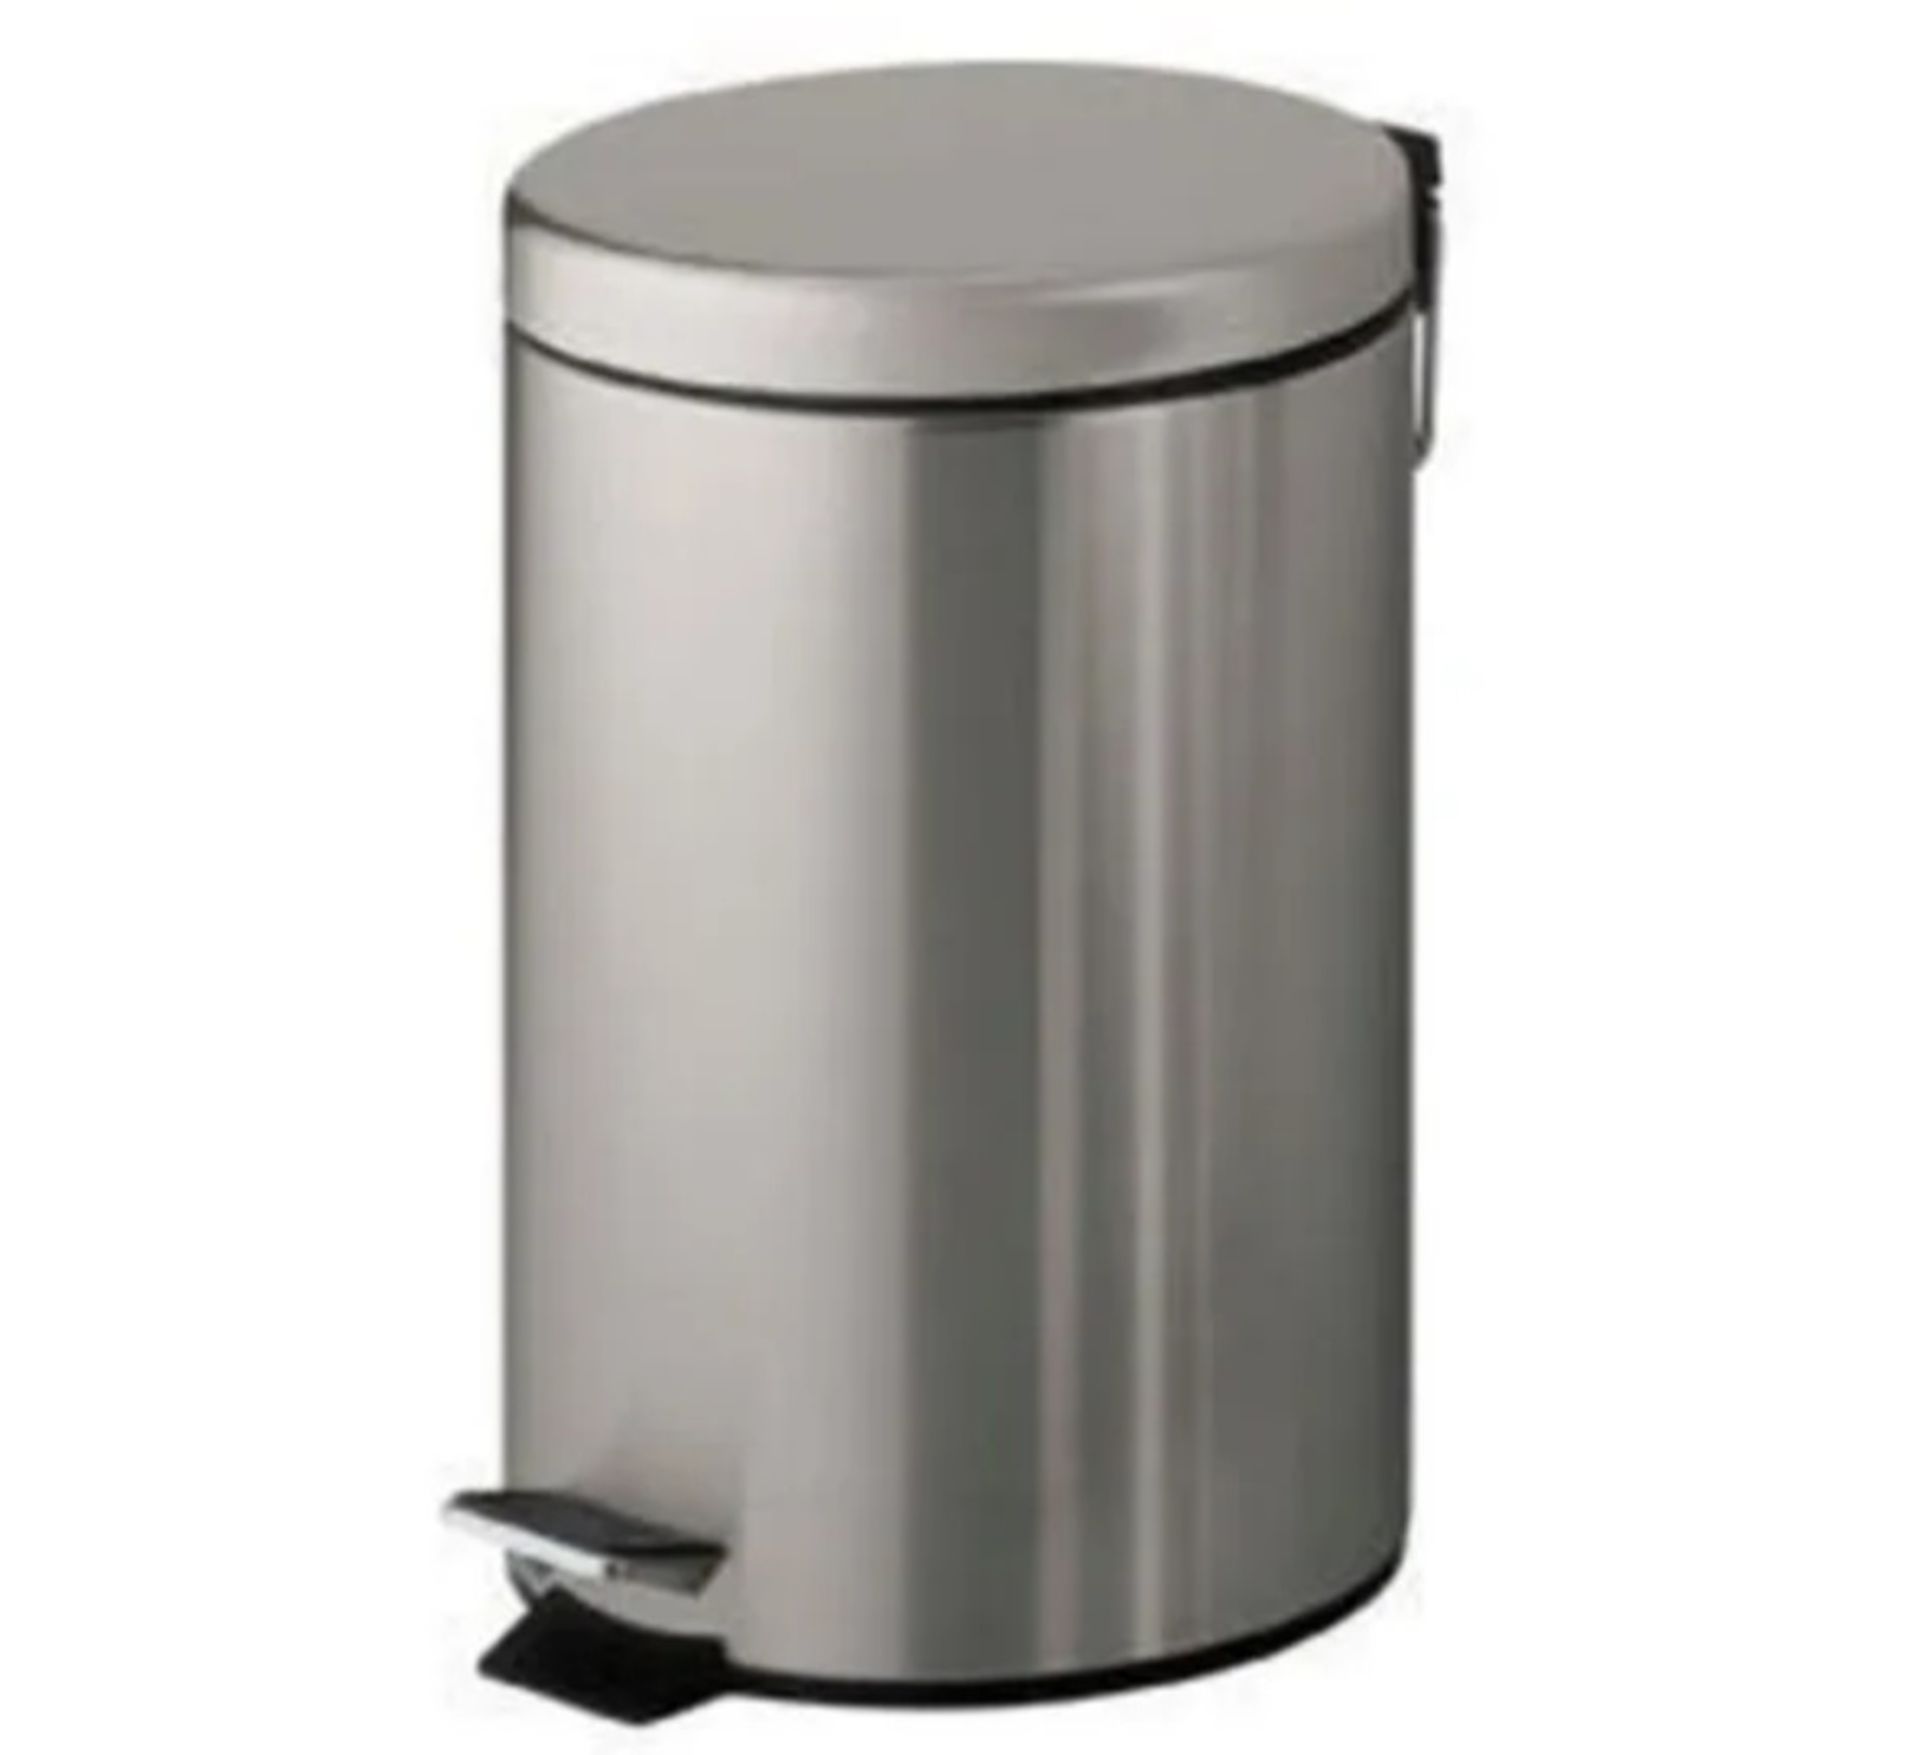 30 x Corby 7 litre Pedal Bins New & Boxed